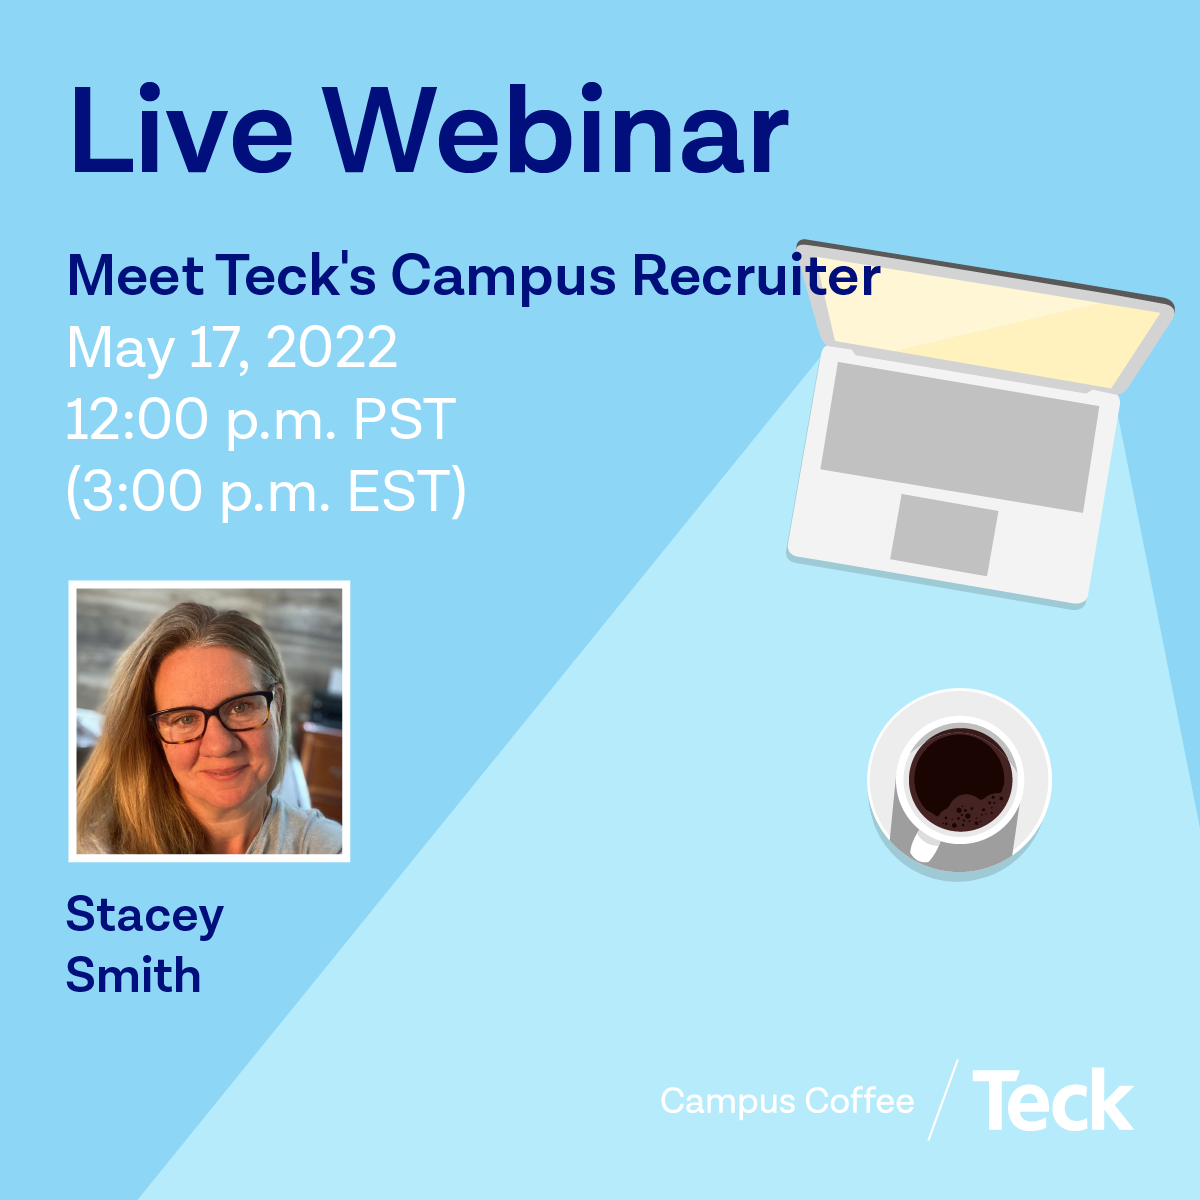 A poster of a live webinar with a campus recruiter